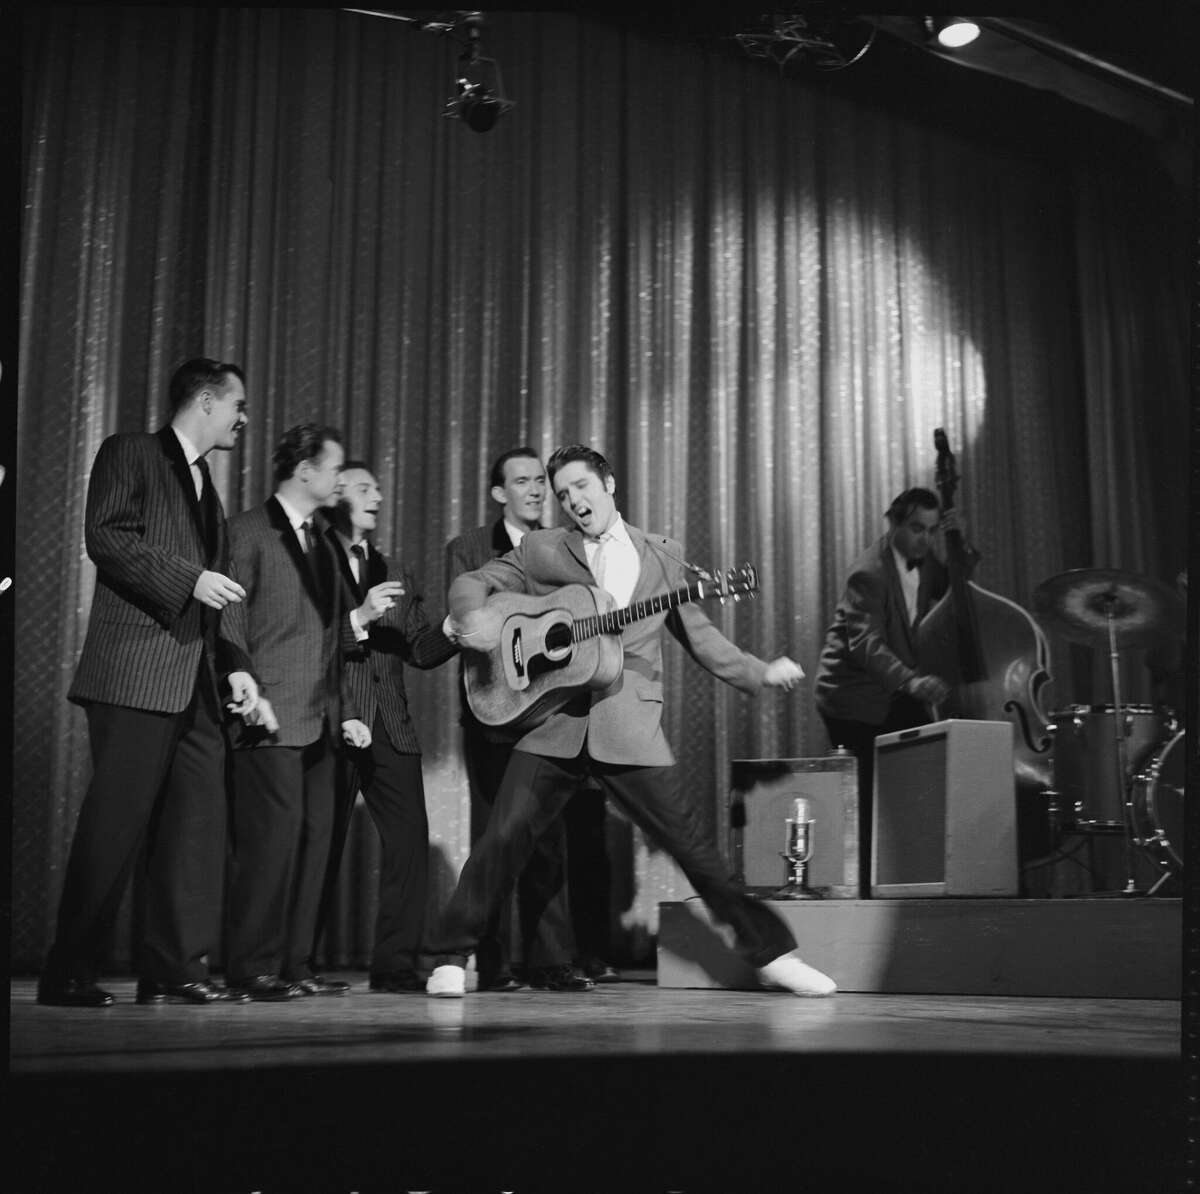 American rock and roll singer and actor Elvis Presley (1935 - 1977) dances as he sings during his second appearance on the Ed Sullivan Show, New York, New York, October 28, 1956. His back-ups singers, all in matching outfits, snap their fingers behind him, while and a bassist plays at the right. (Photo by CBS Photo Archive/Getty Images)